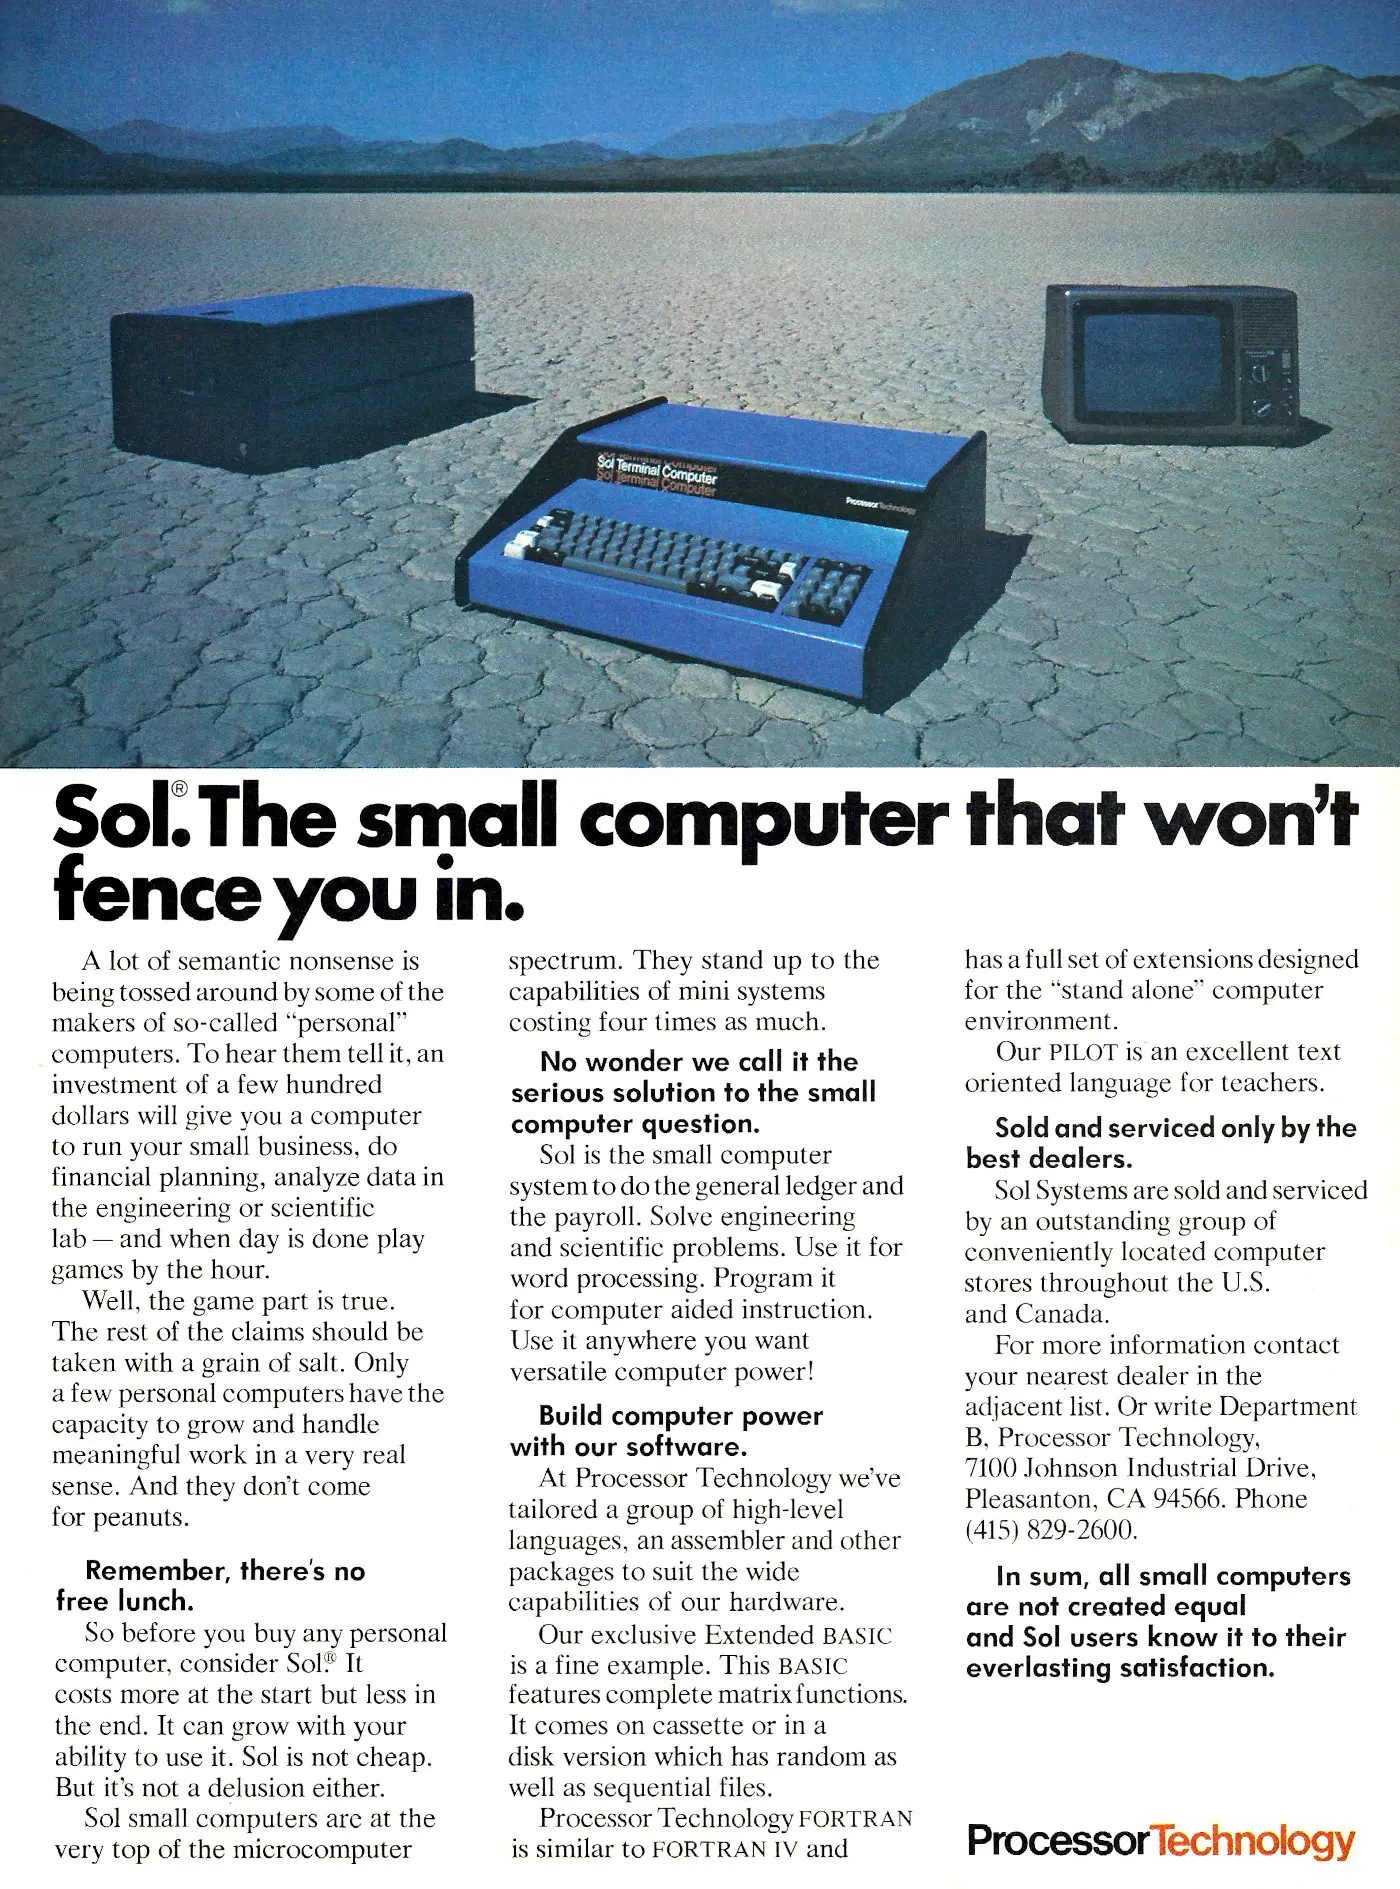 Processor Technology Advert: Sol. The small computer that won't fence you in, from Byte - The Small Systems Journal, December 1978